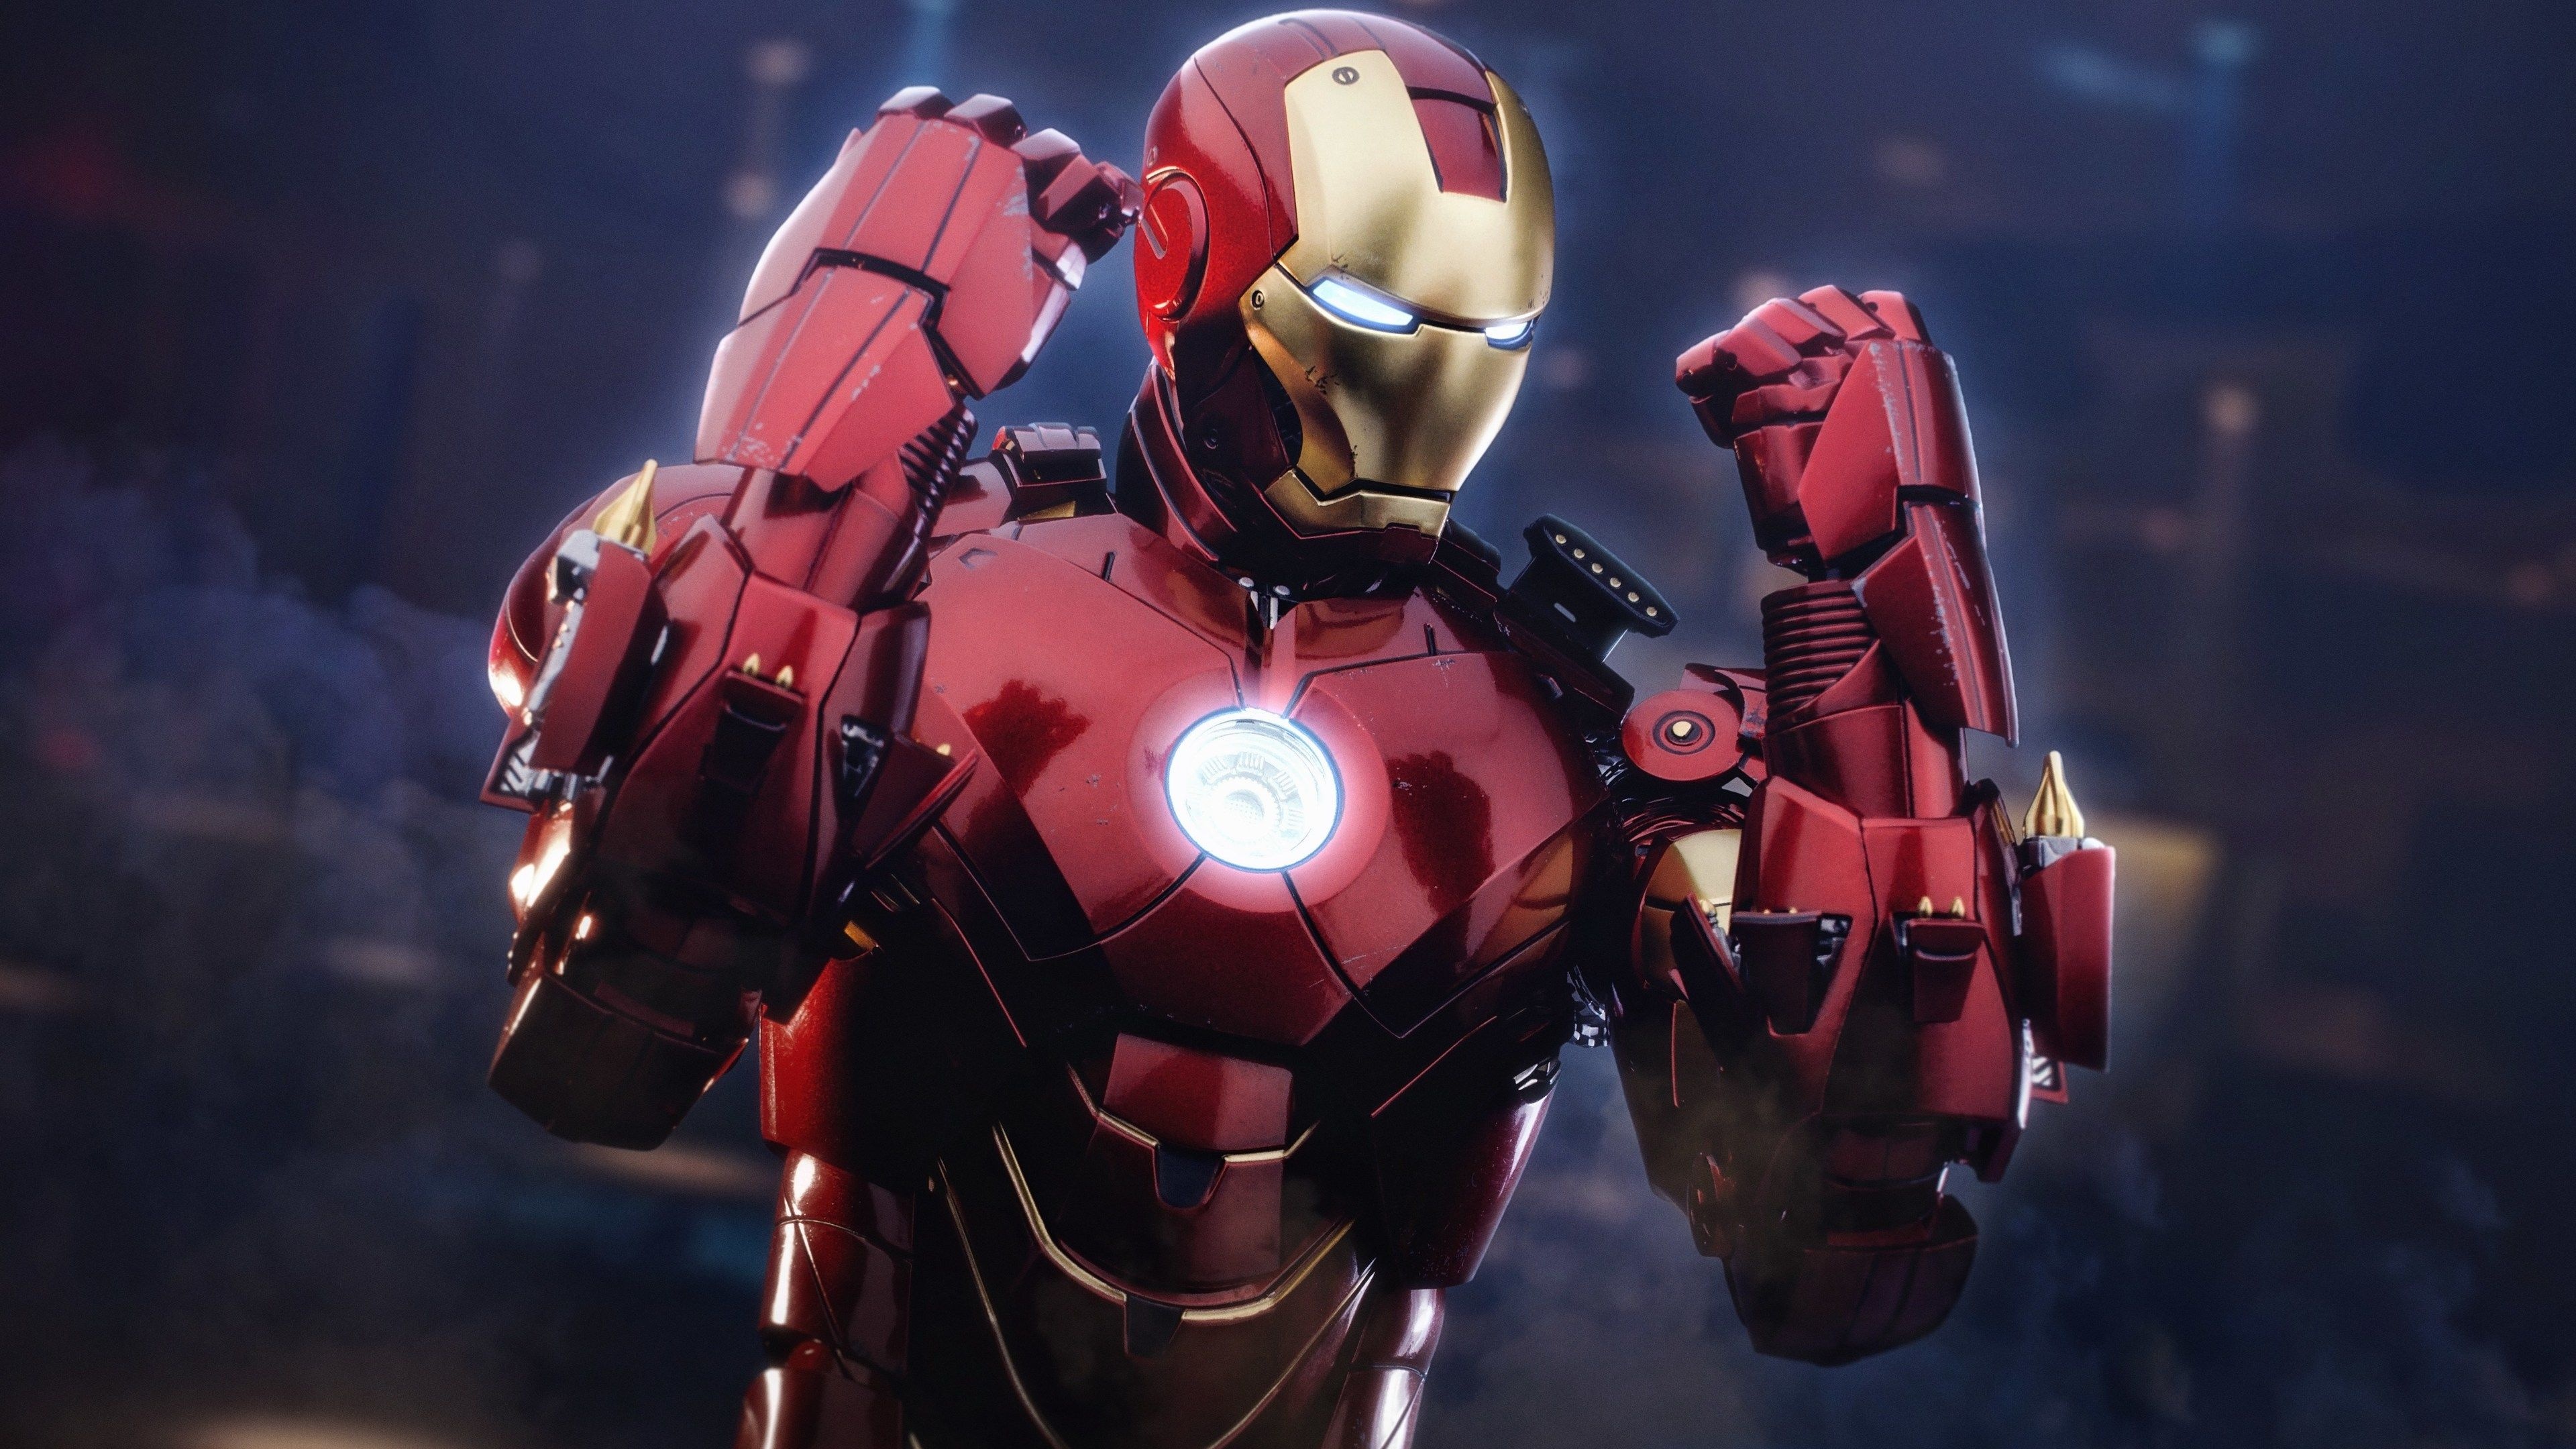 Iron Man: Mark 4, Tony Stark's fourth suit, created to replace the Mark 3. 3840x2160 4K Wallpaper.